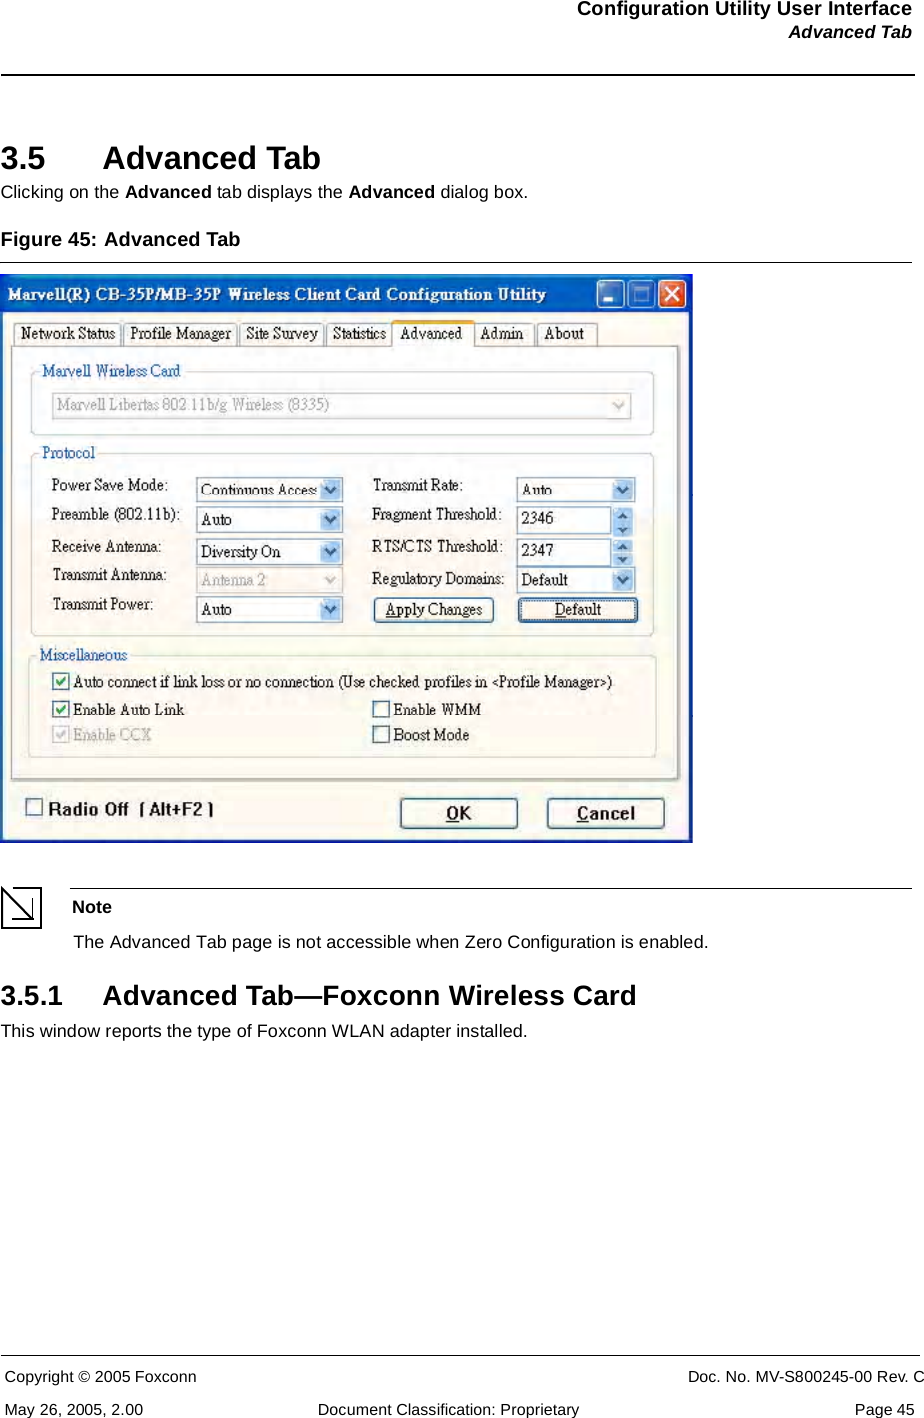 Configuration Utility User InterfaceAdvanced TabCopyright © 2005 Foxconn CONFIDENTIAL Doc. No. MV-S800245-00 Rev. CMay 26, 2005, 2.00 Document Classification: Proprietary  Page 453.5 Advanced TabClicking on the Advanced tab displays the Advanced dialog box. Figure 45: Advanced Tab NoteThe Advanced Tab page is not accessible when Zero Configuration is enabled.3.5.1 Advanced Tab—Foxconn Wireless CardThis window reports the type of Foxconn WLAN adapter installed.